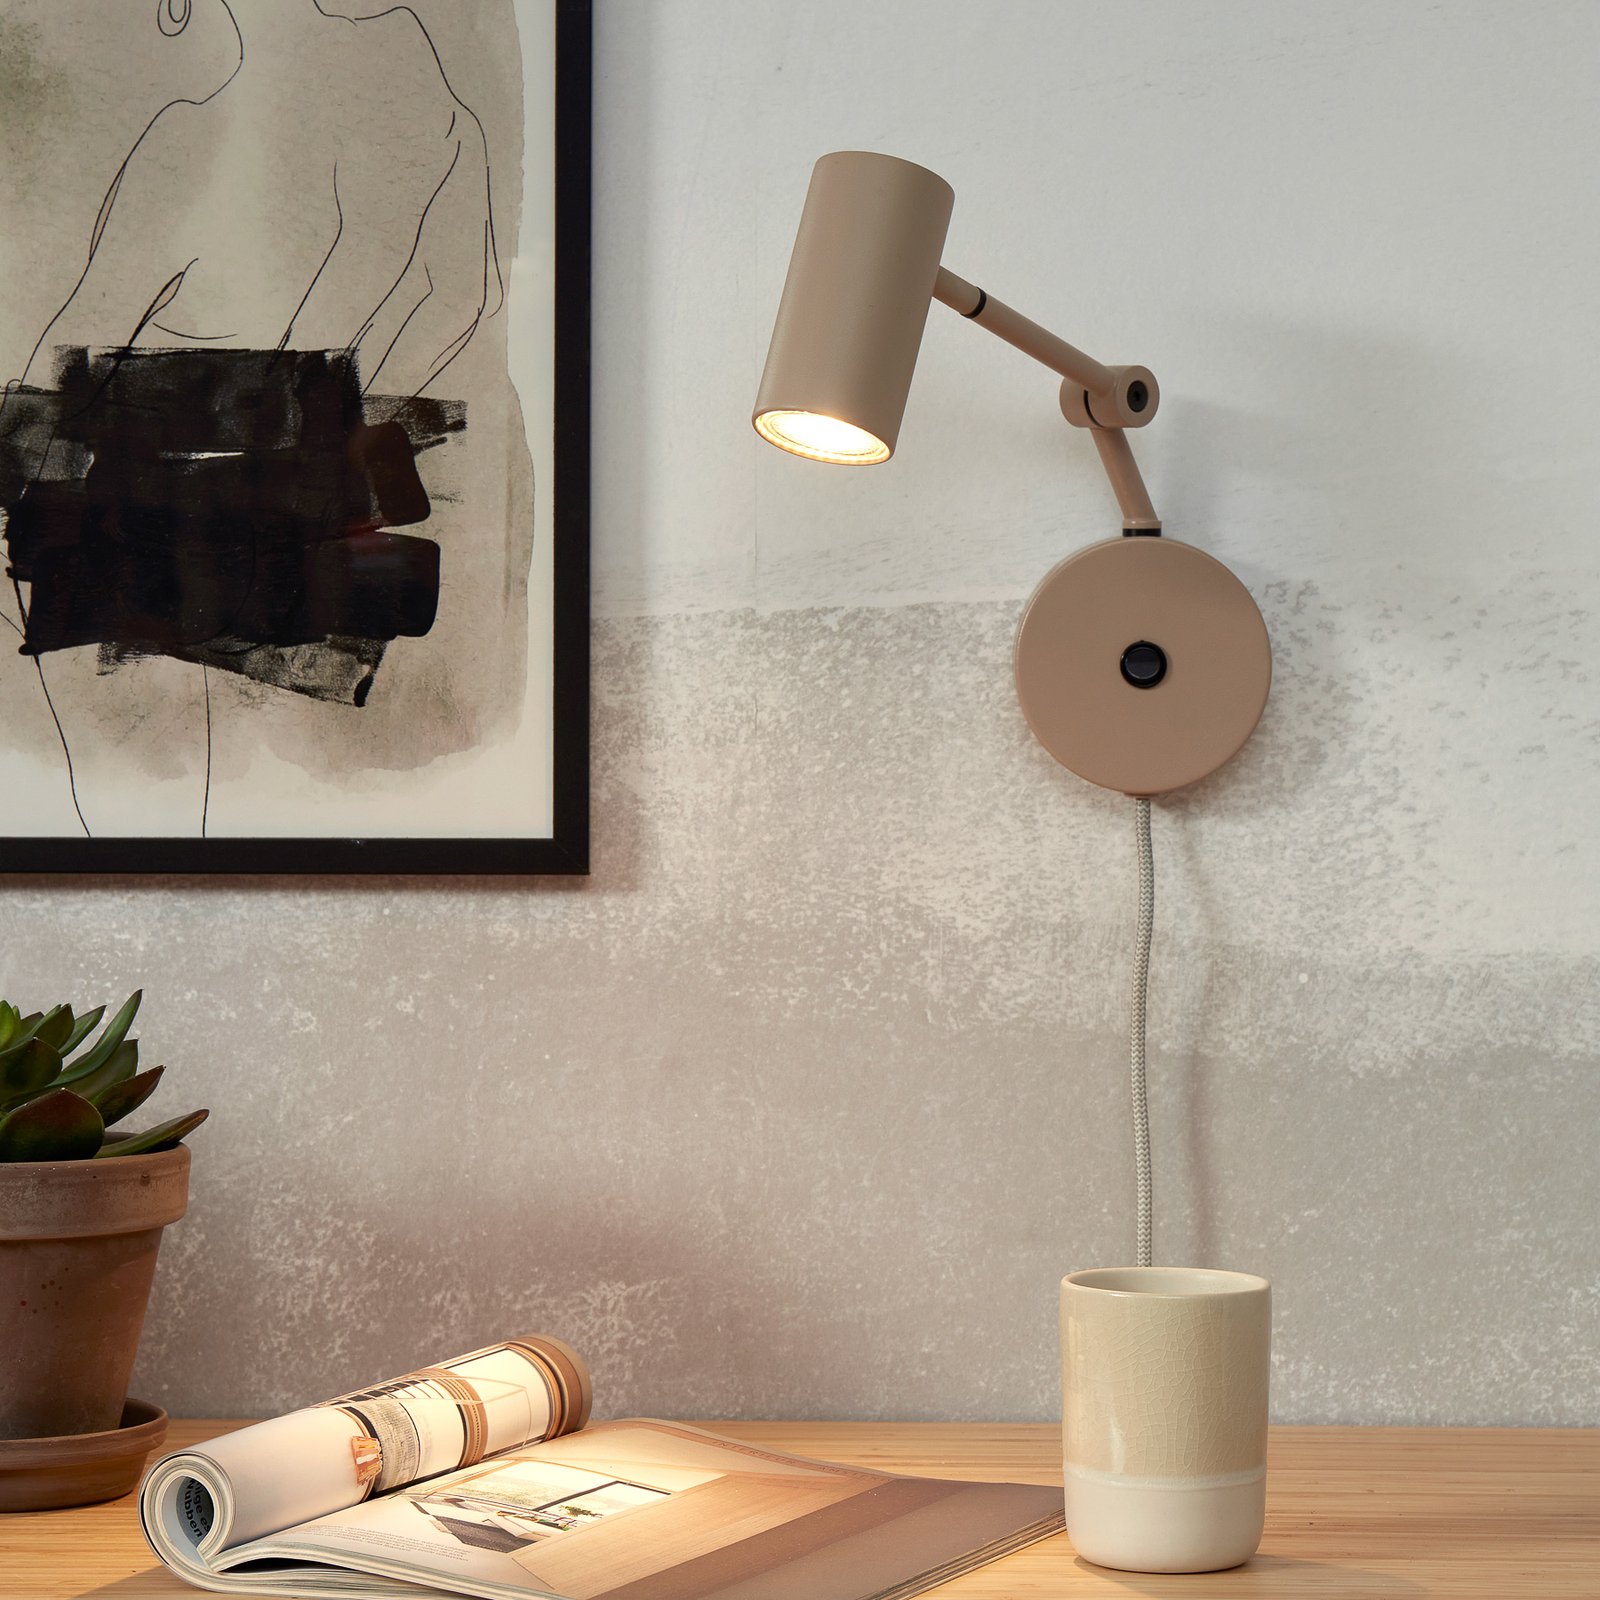 It's about RoMi wall light Montreux, sand